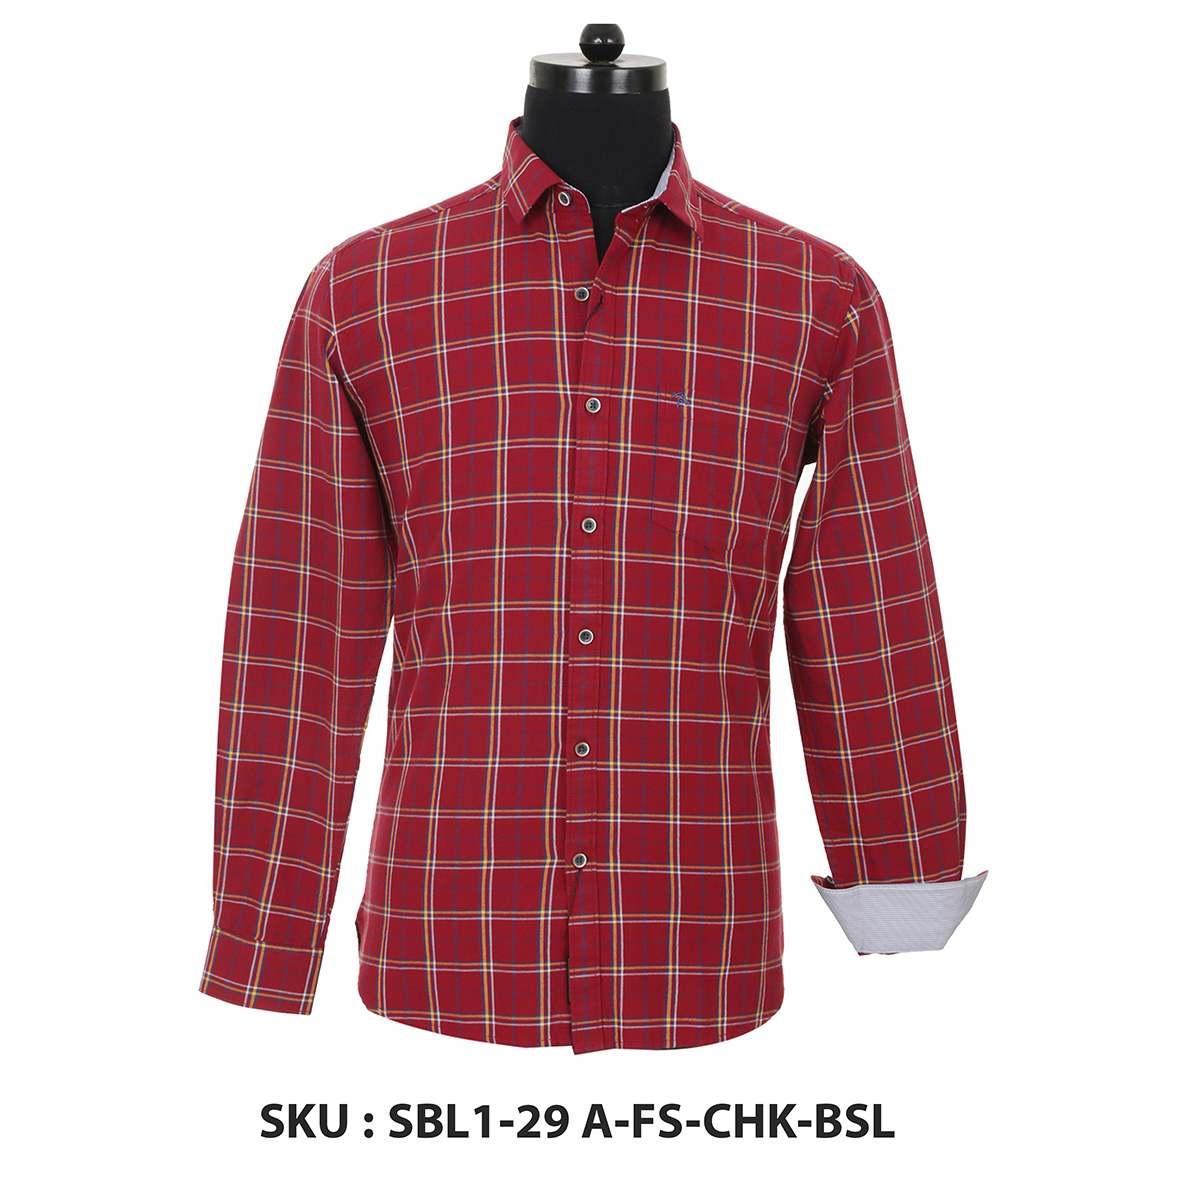 Classic Polo Mens Woven Shirt Sbl1-29 A-Fs-Chk-Bsl Red M